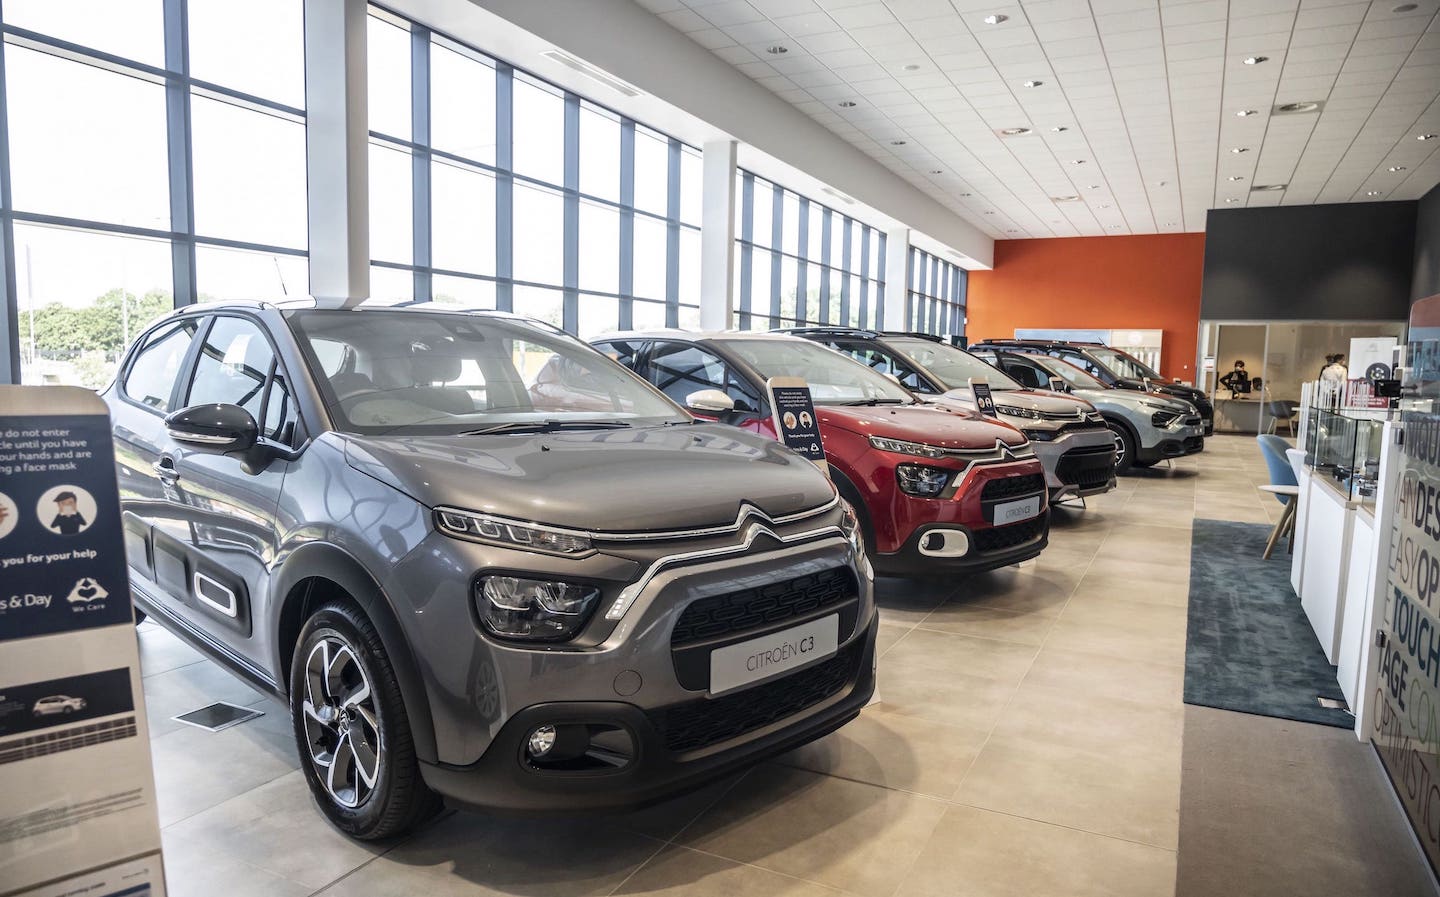 Citroen to introduce British sign language across its retail operations